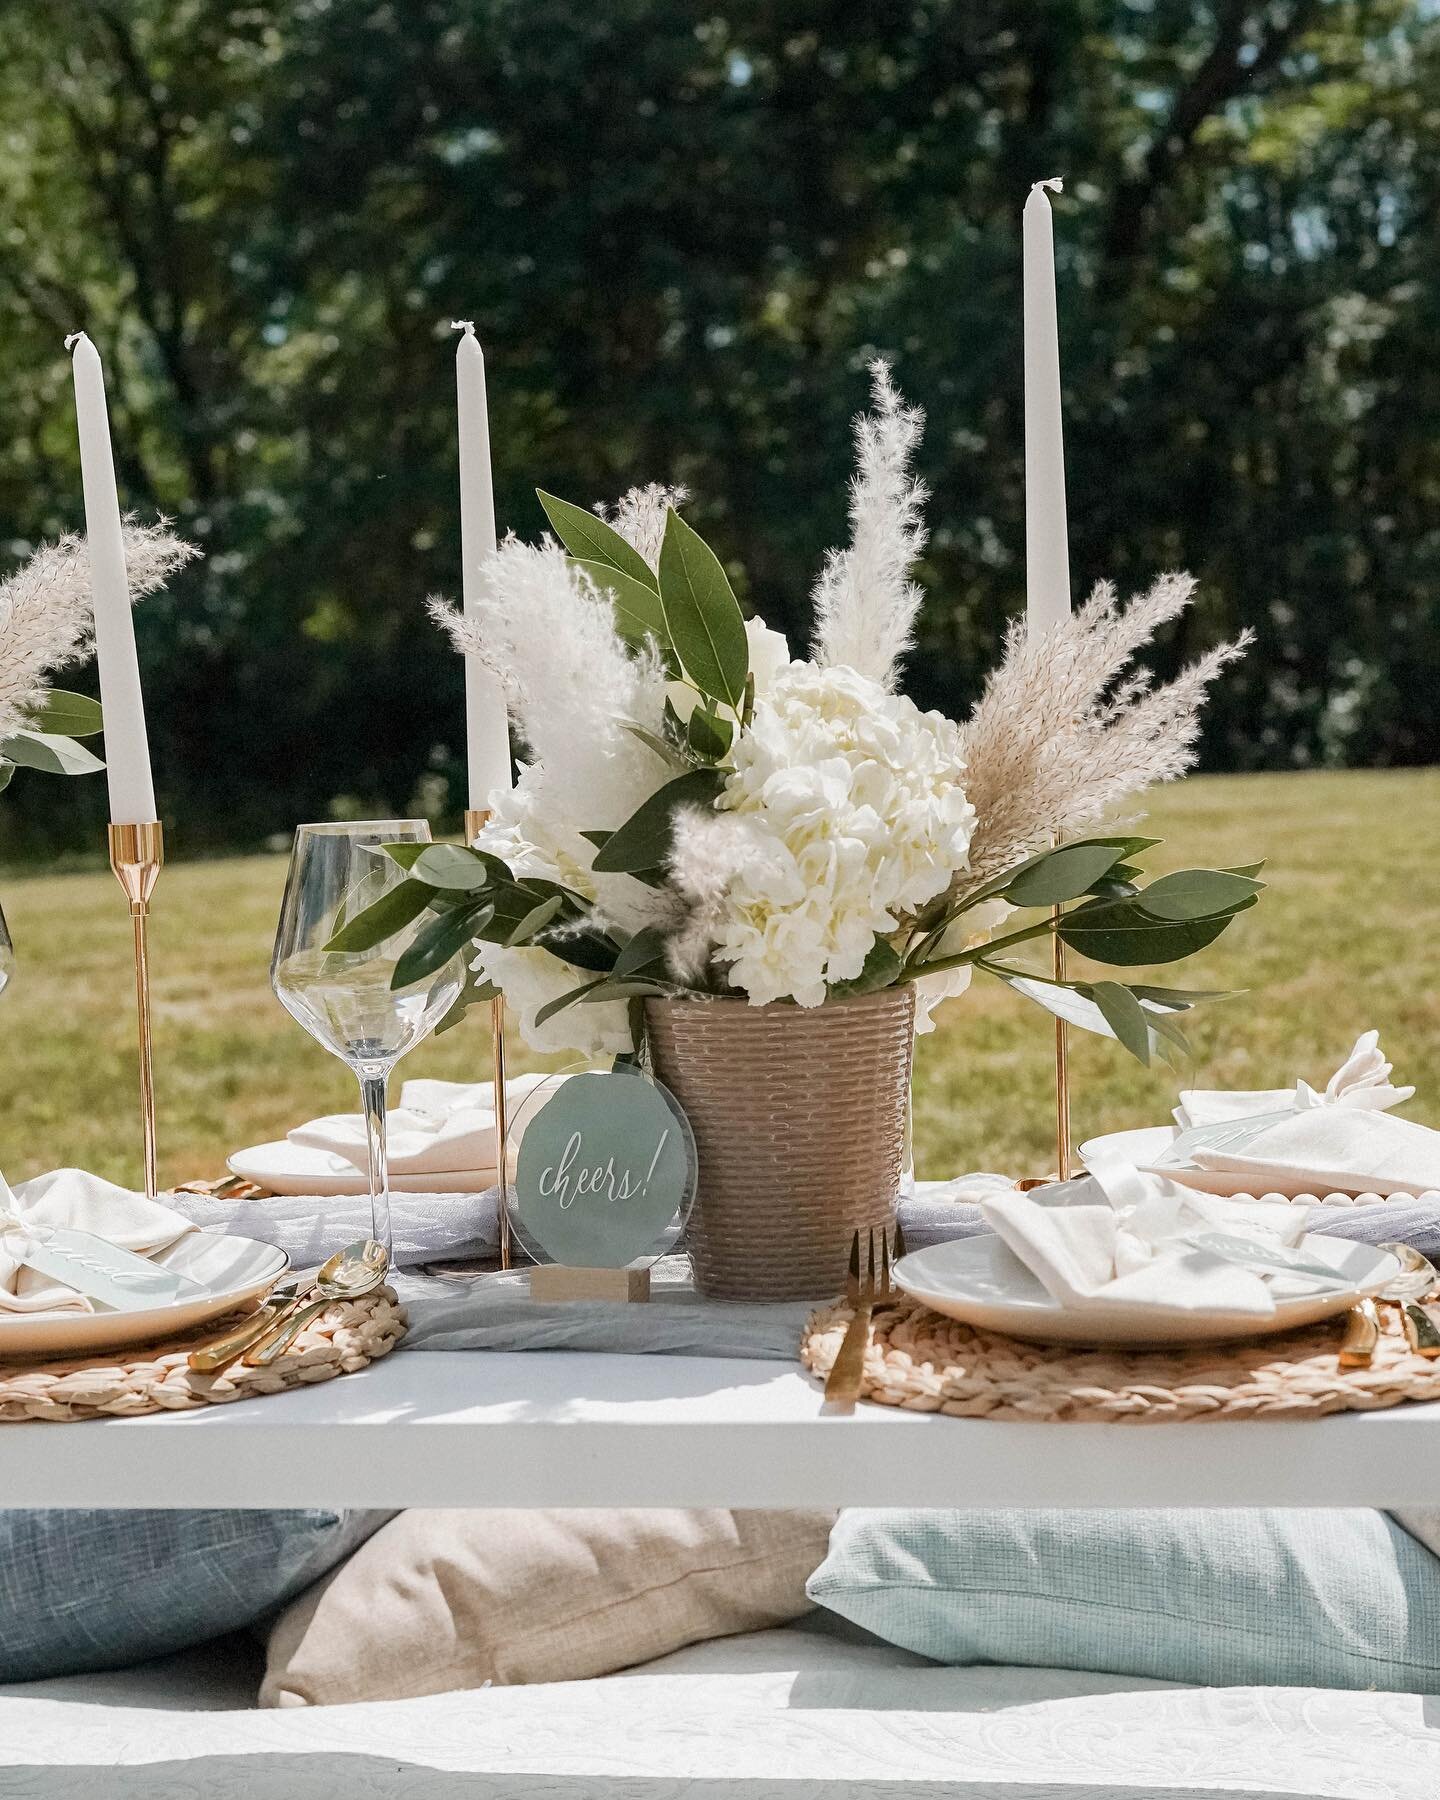 Cheers 🥂
&bull;
The one of a kind picnic experience with your favorite people. 
&bull;
Event planner &amp; designer: @enchantedevents.ri 
Decor/rentals: @alacart_ri 
Florist: @abushelandapeckfloralshop 
Signs: @hopeinhandfuls 
Photographer: @kelsima